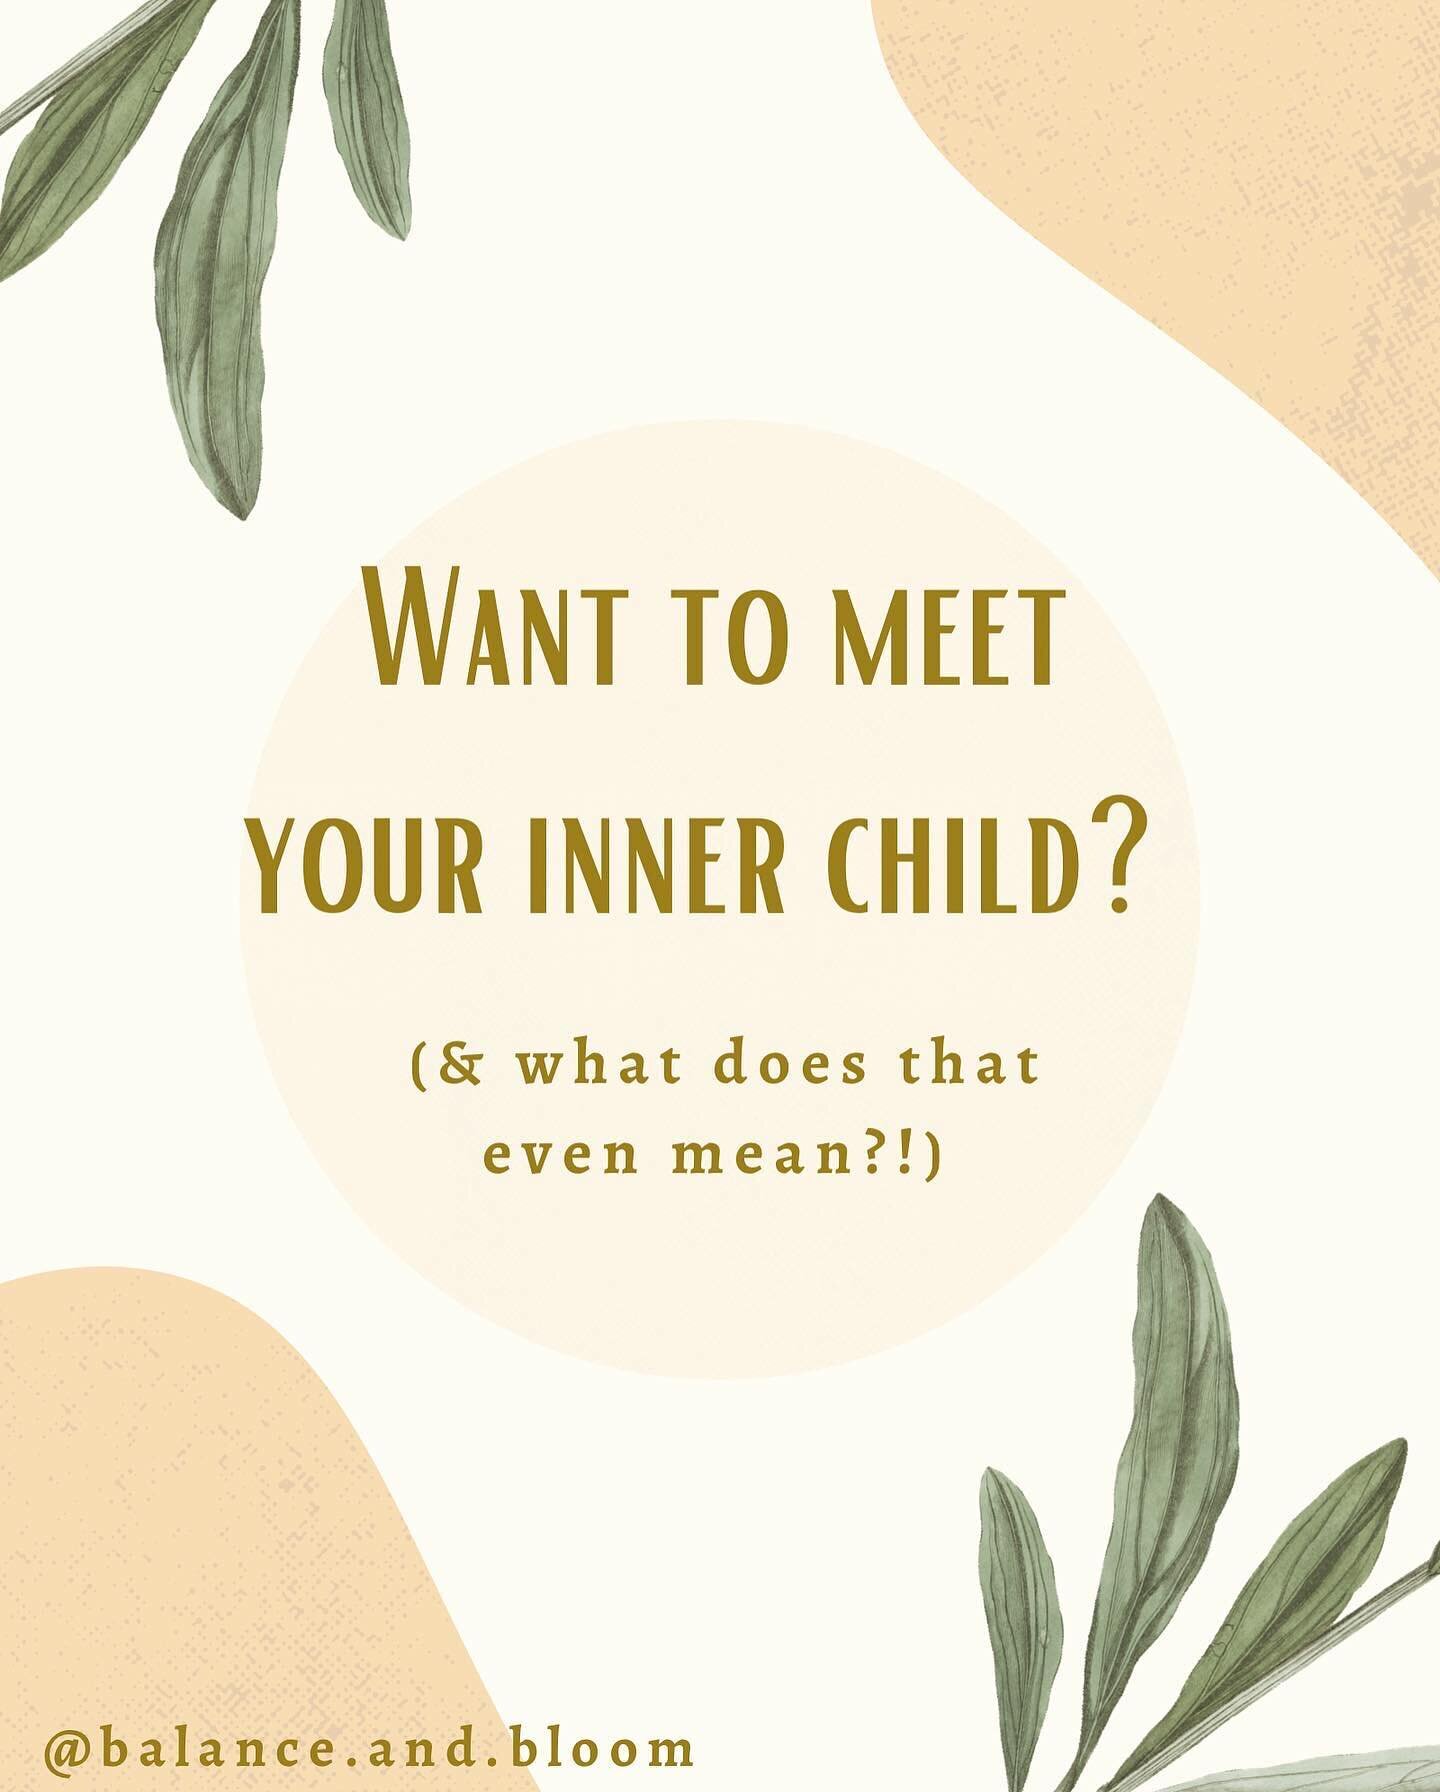 Your inner child is a part of you and it may need a little TLC. 

Your inner child is the child-like part of your unconscious mind. You may have picked up messages growing up that you are still clinging to as you may feel like it&rsquo;s the only way